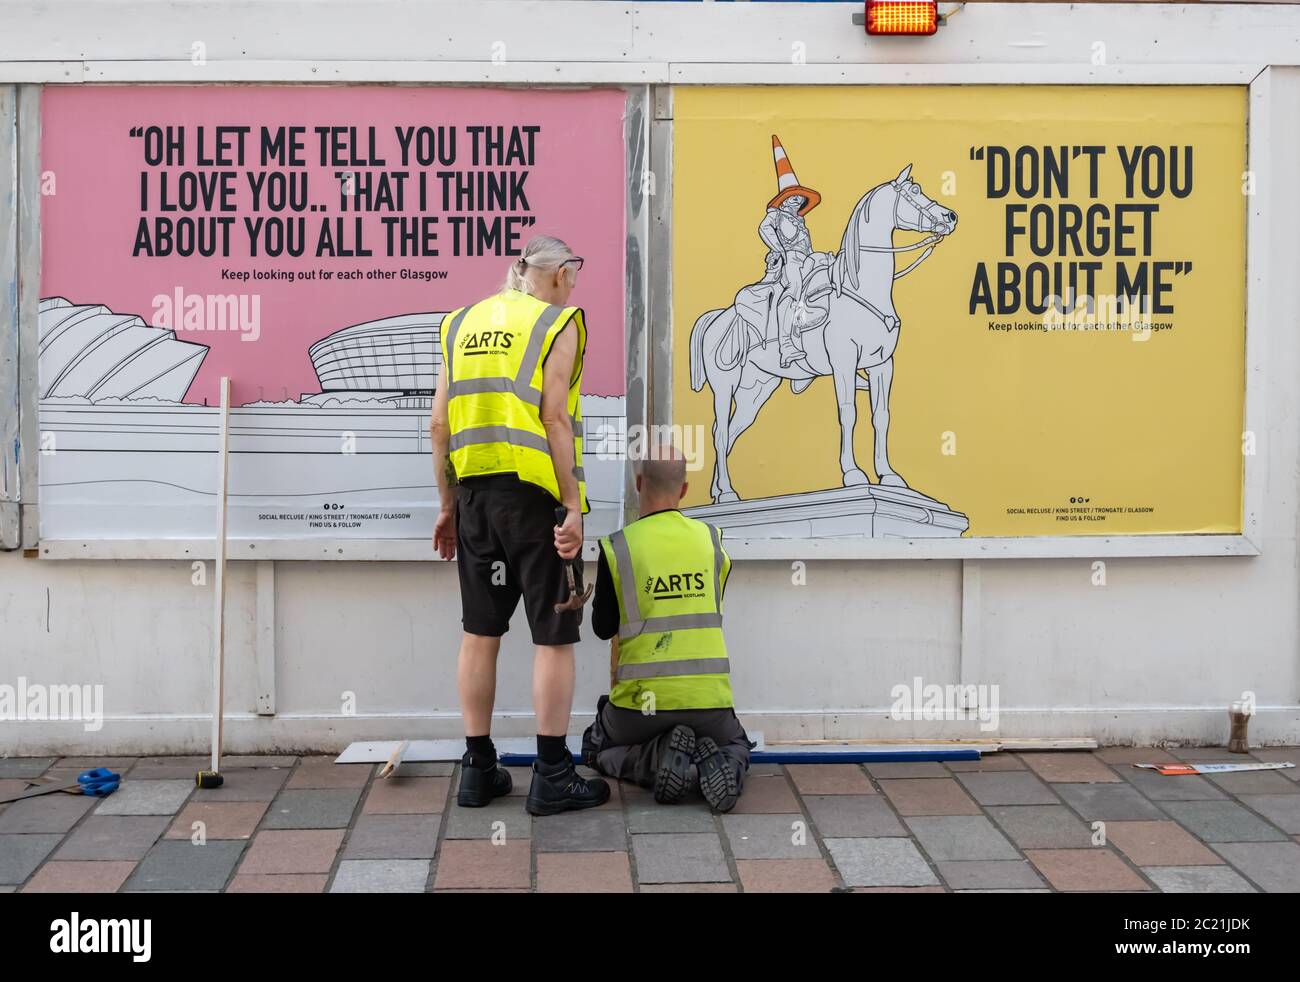 Glasgow Scotland Uk 16th June 2020 Two Members Of Jack Arts Scotland Fixing Posters Showing Glasgow Landmarks Along With Song Lyrics One Poster Shows A Drawing Of The Armadillo And The Sse